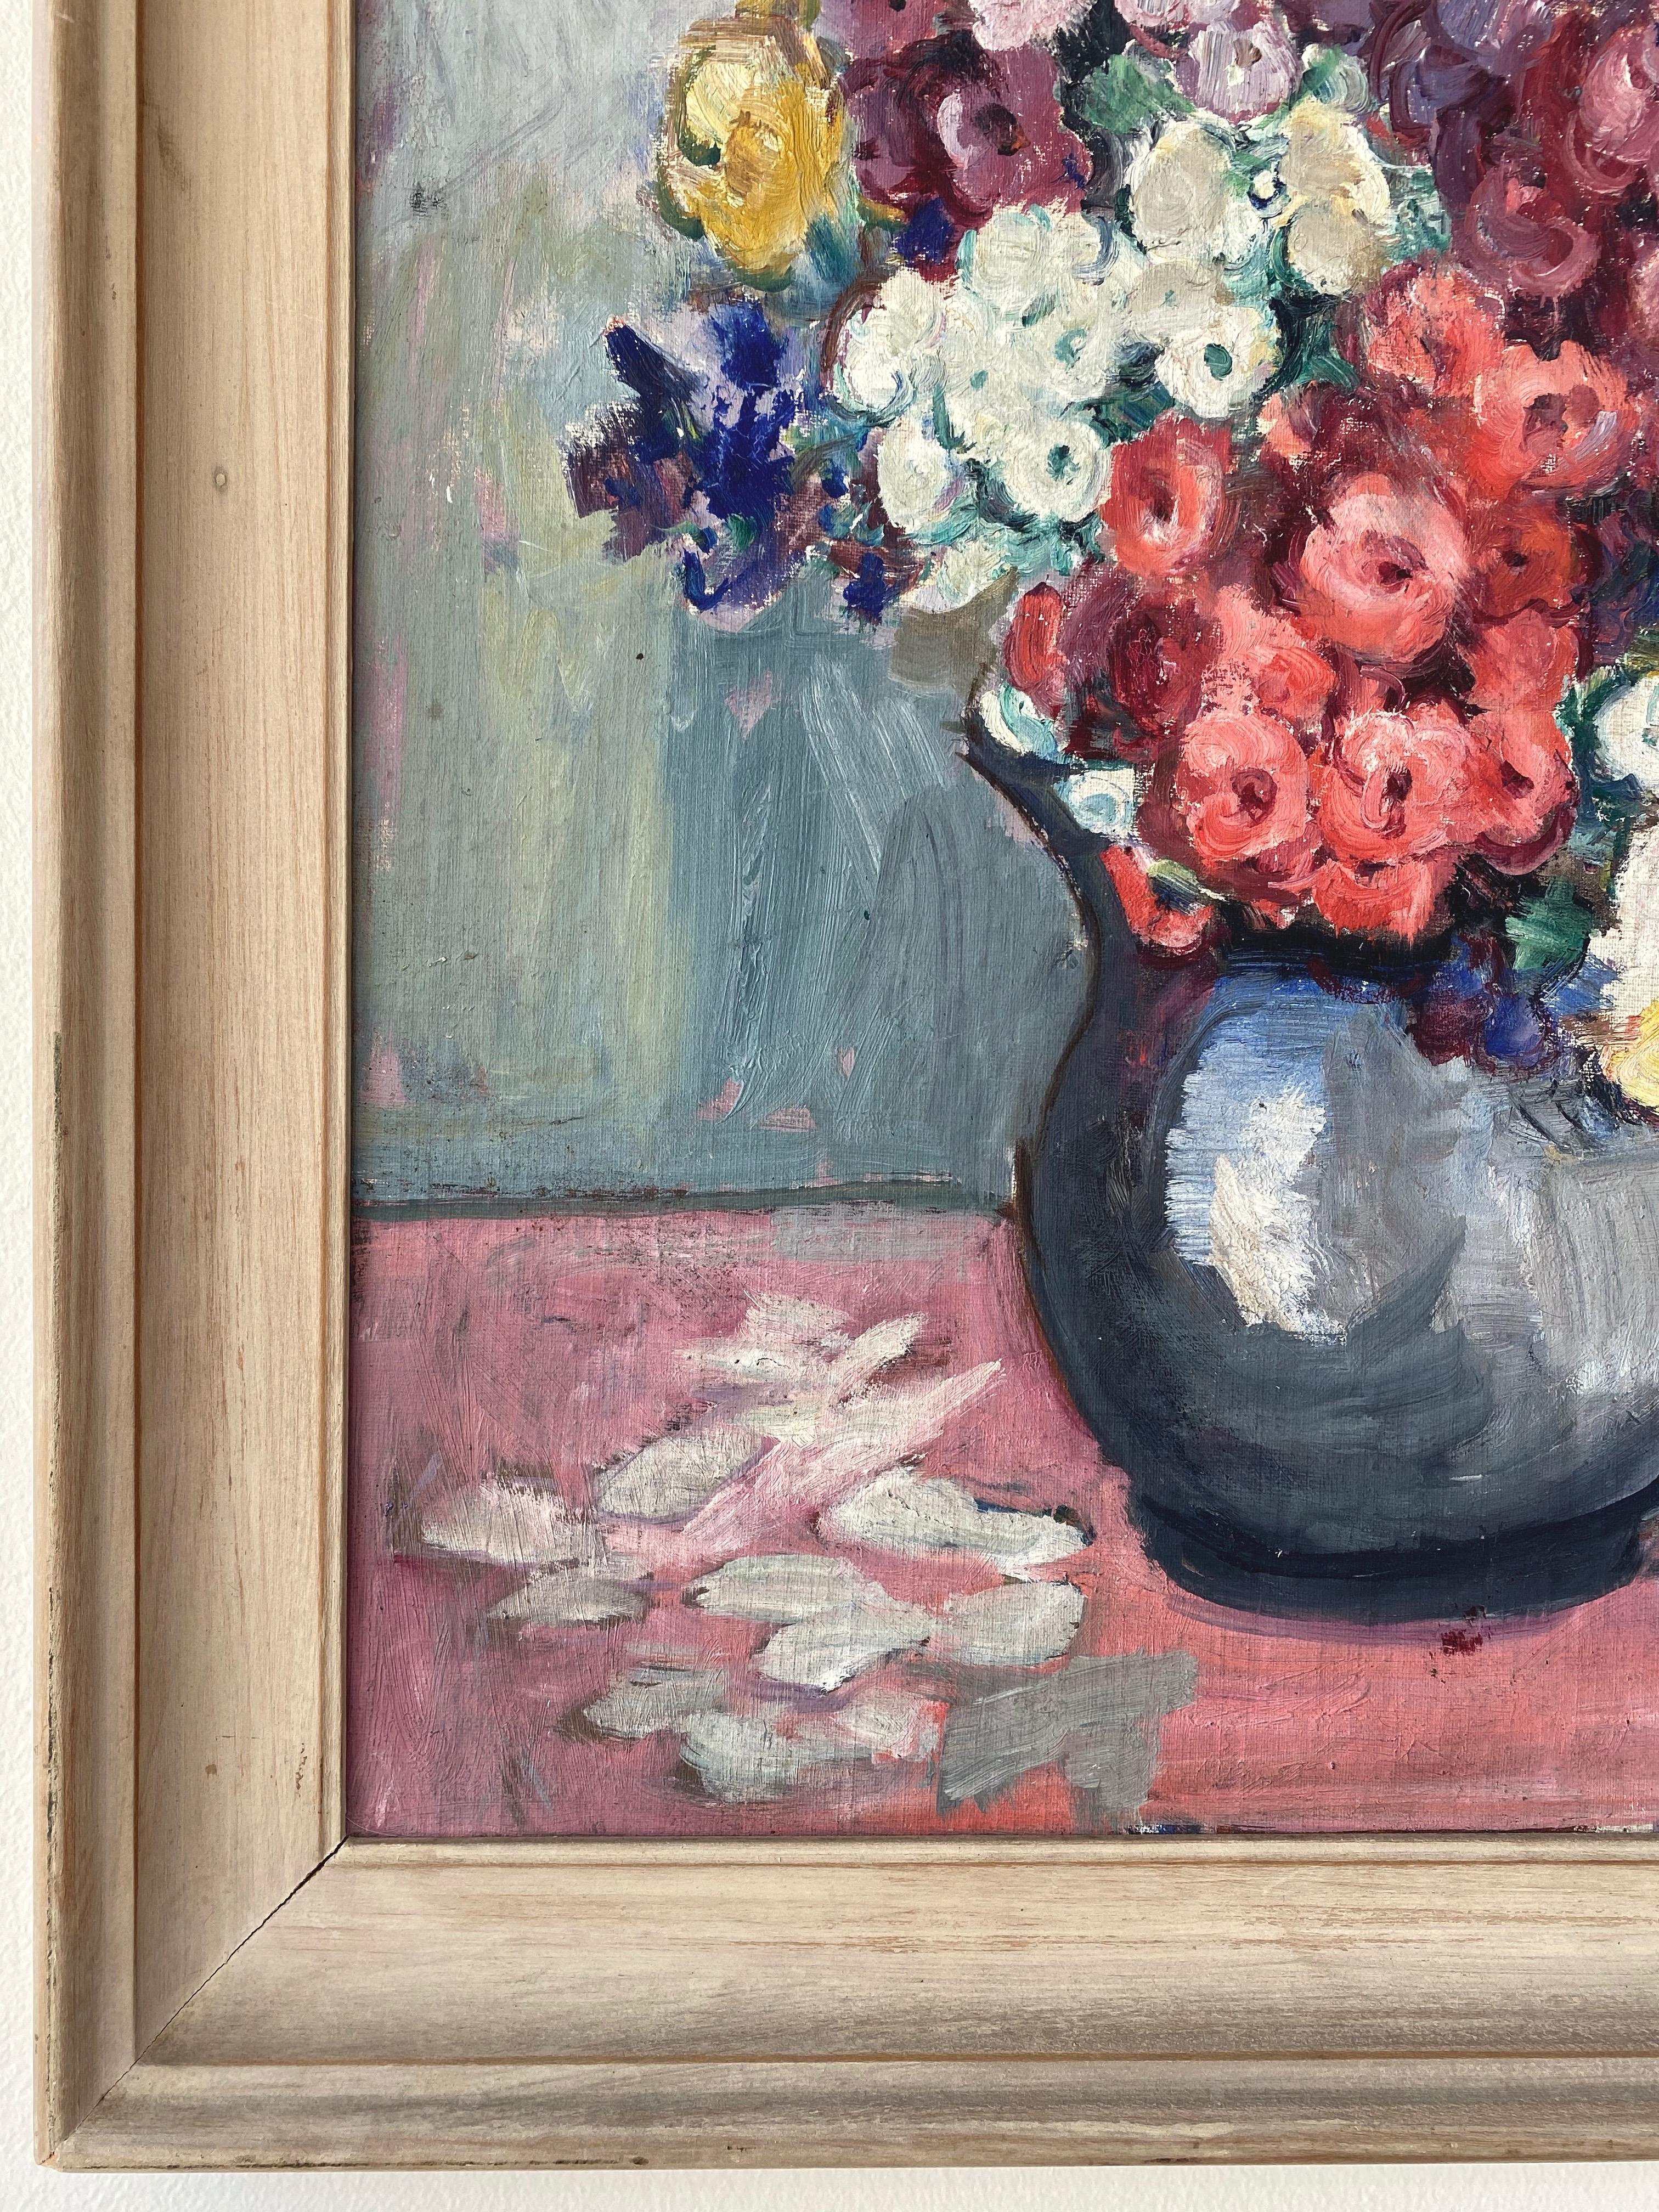 Alberta Kinsey “Still Life with Flowers” Impressionist Oil Painting, 1920s For Sale 2